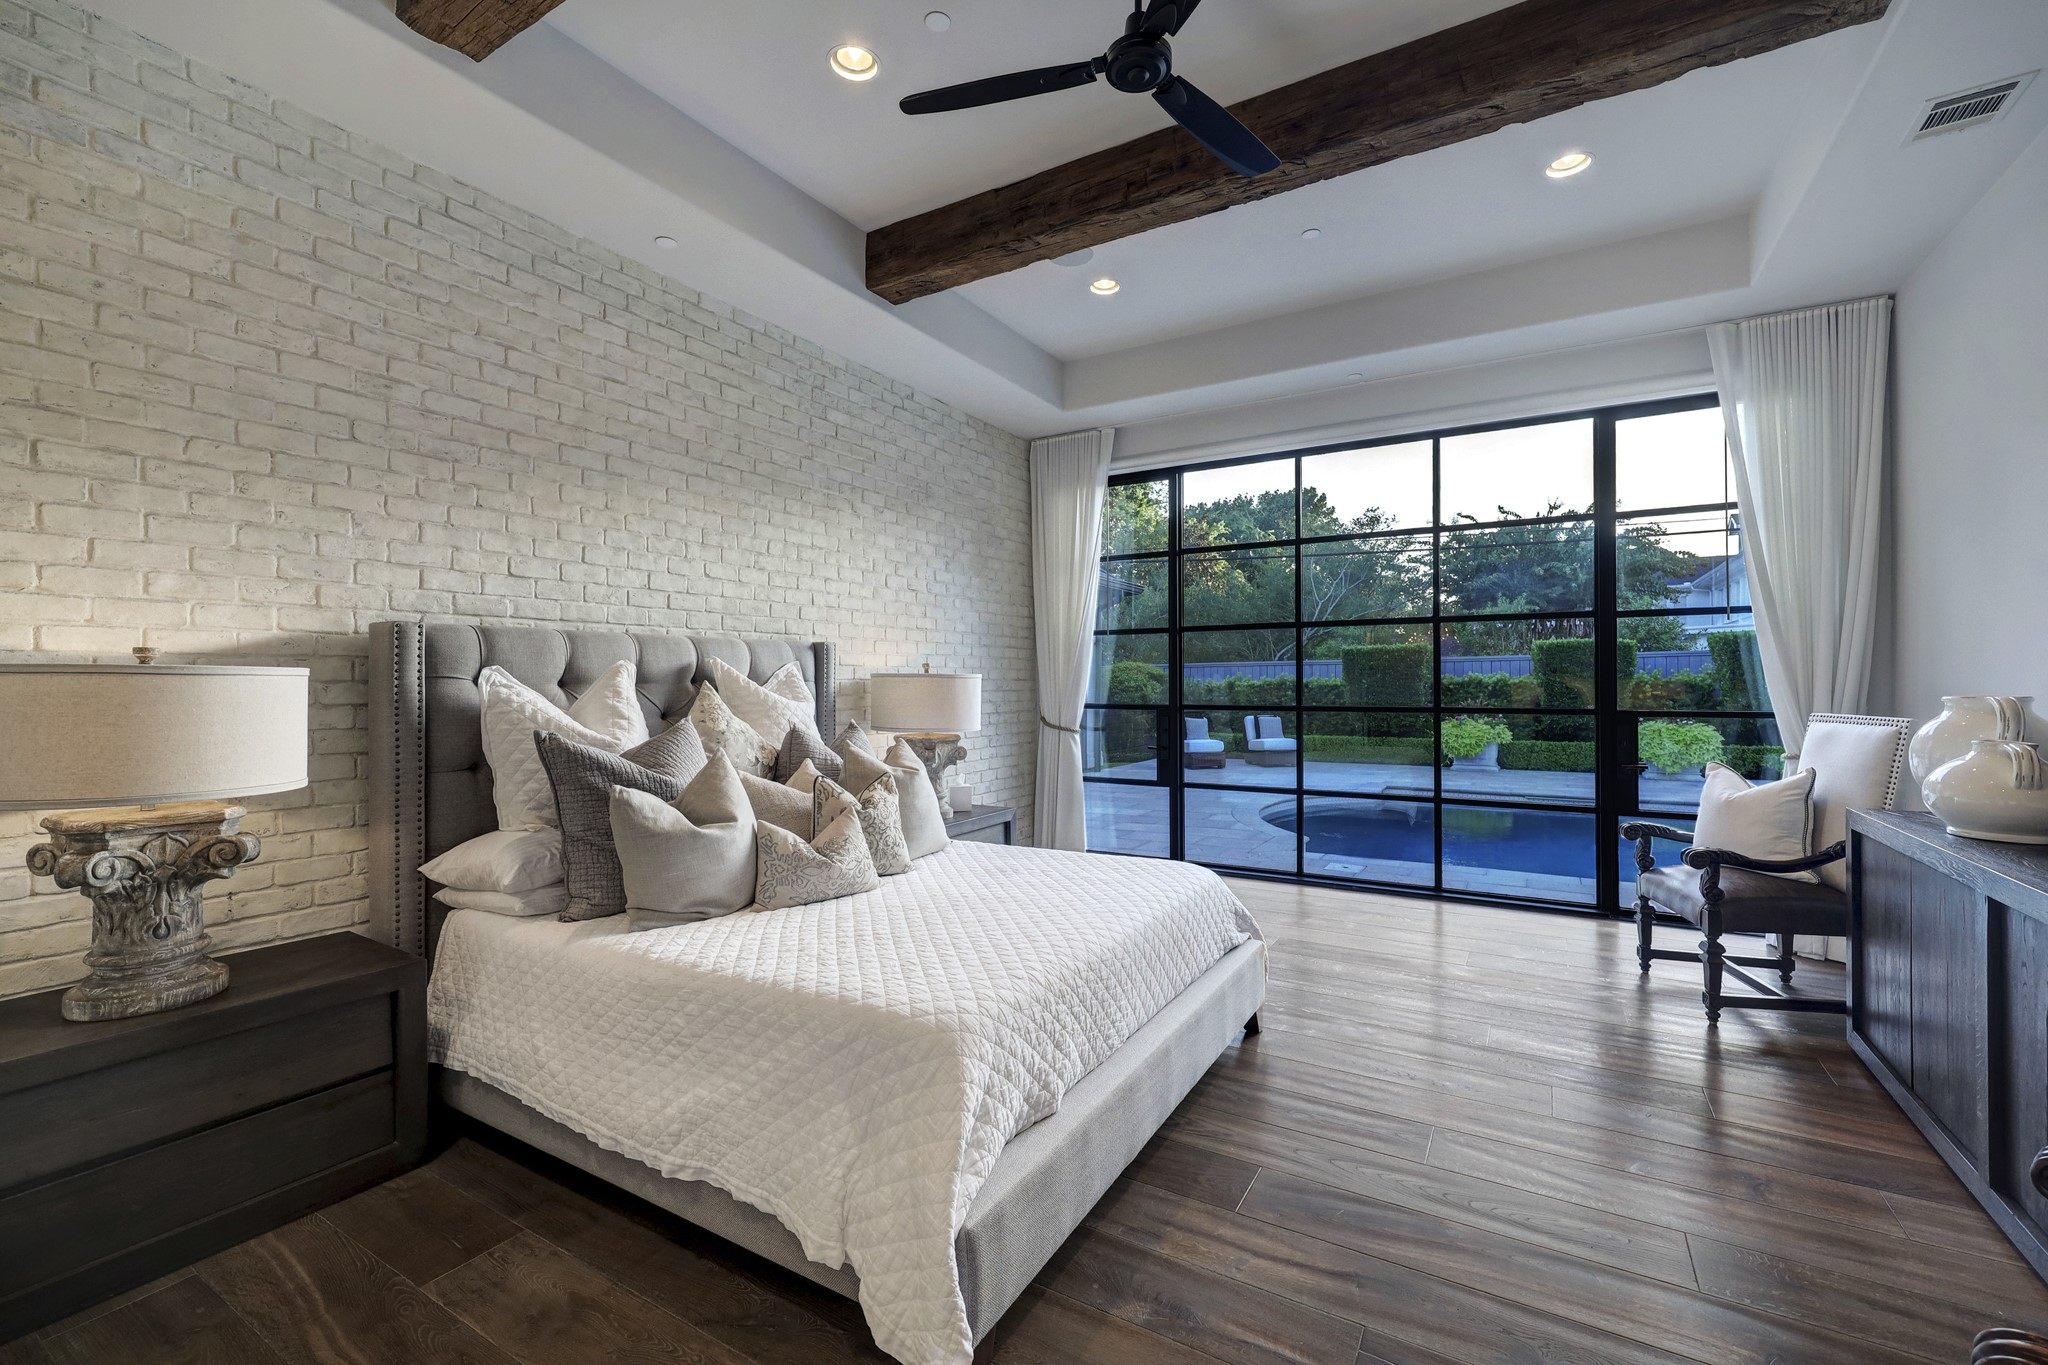 The large primary bedroom includes a painted brick accent wall and a wall of floor-to-ceiling paned windows overlooking your backyard oasis. Exposed wood beams and a trayed ceiling add to the stylish design of the room.